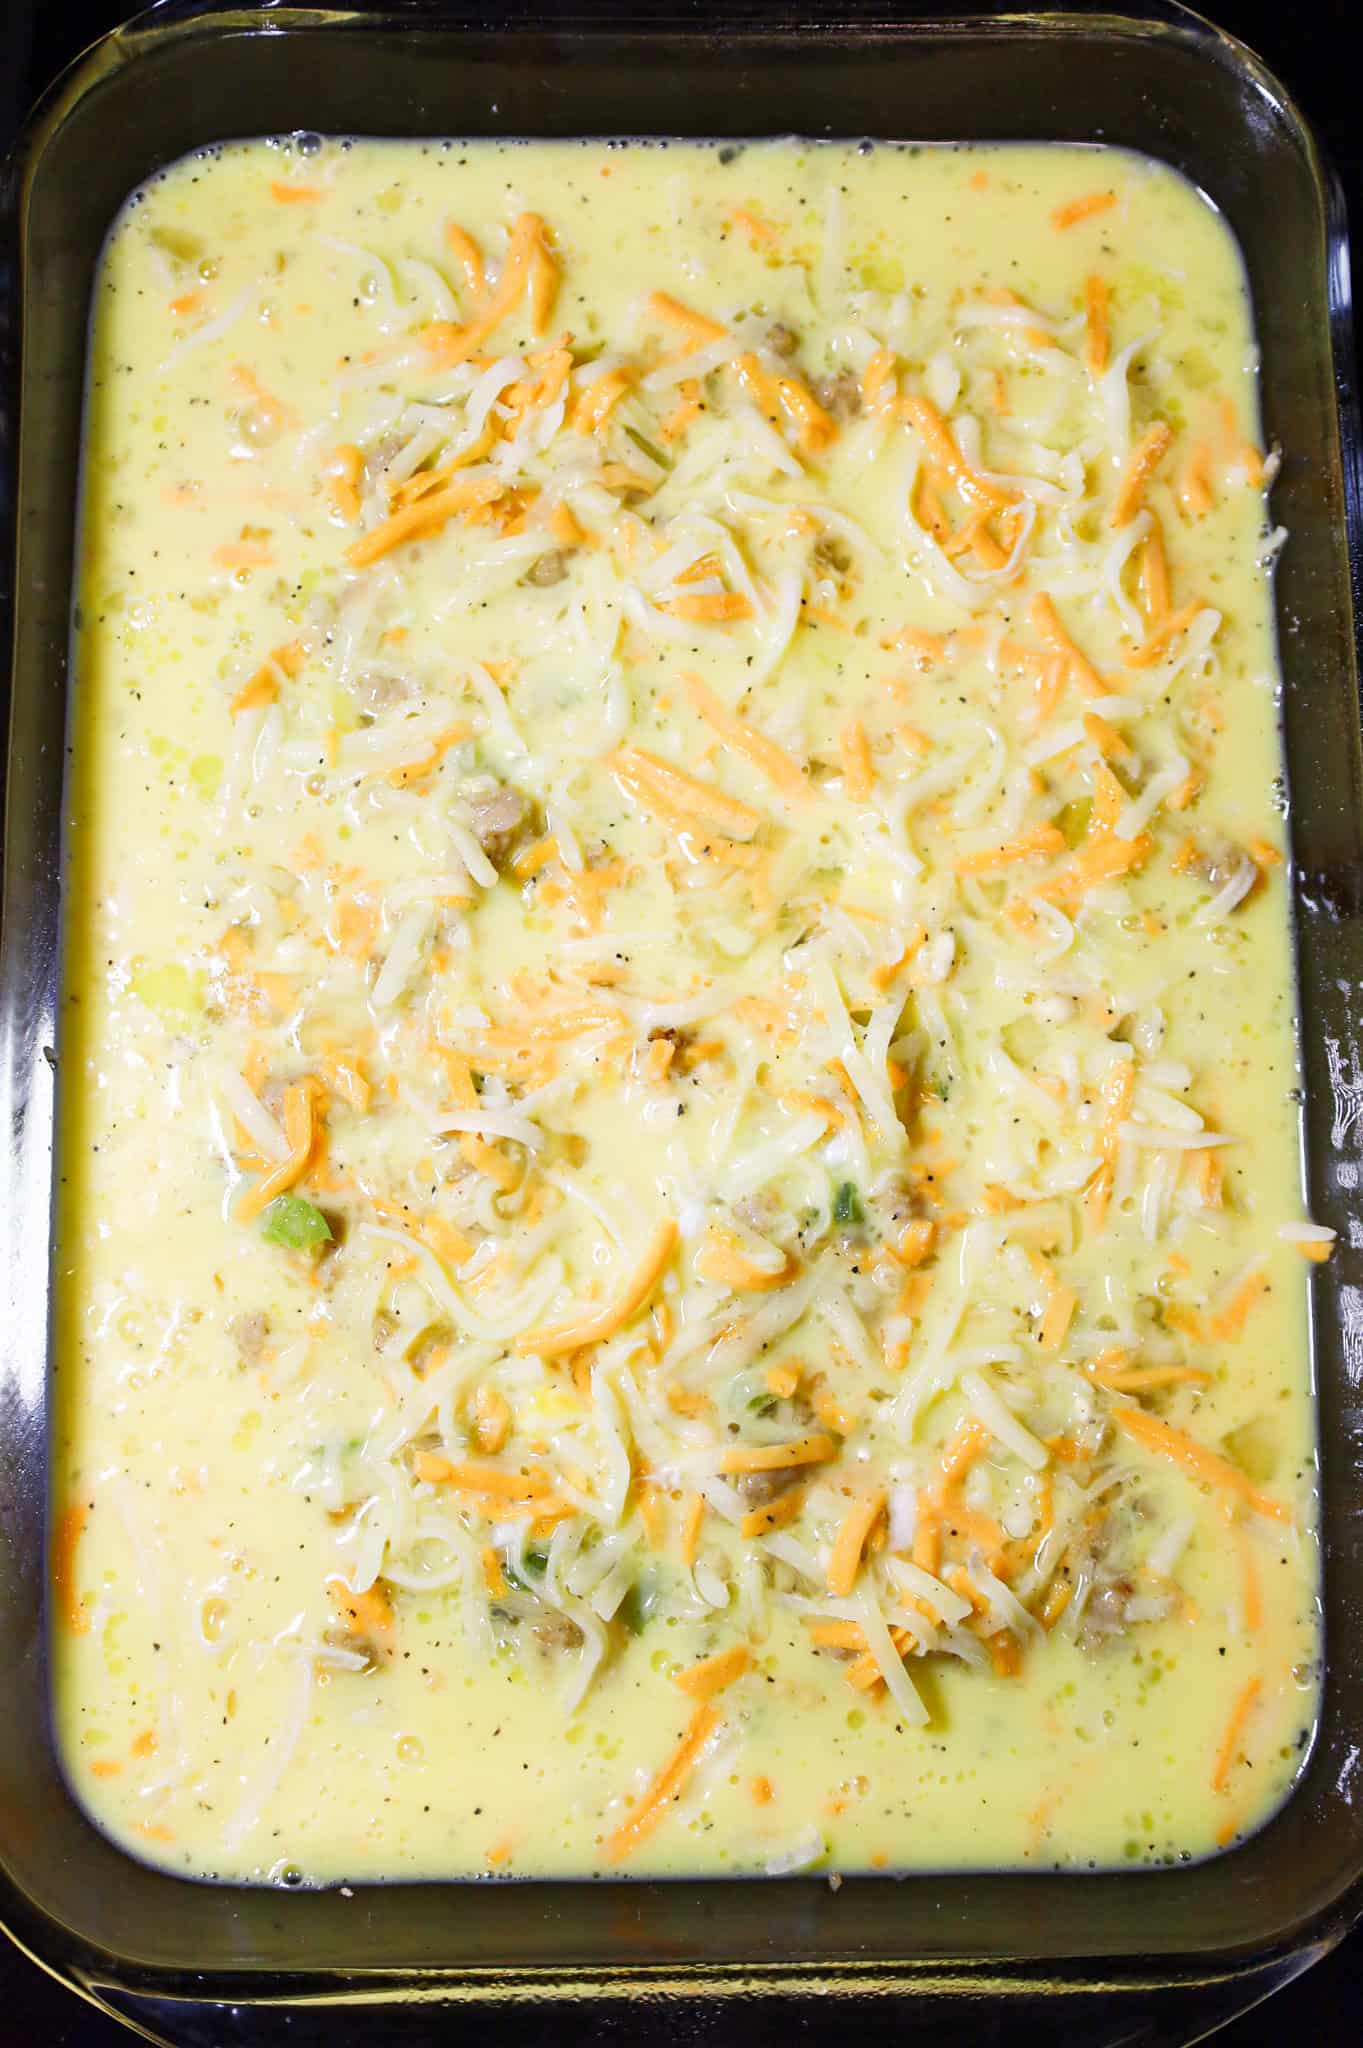 breakfast casserole with biscuits in a casserole dish before baking